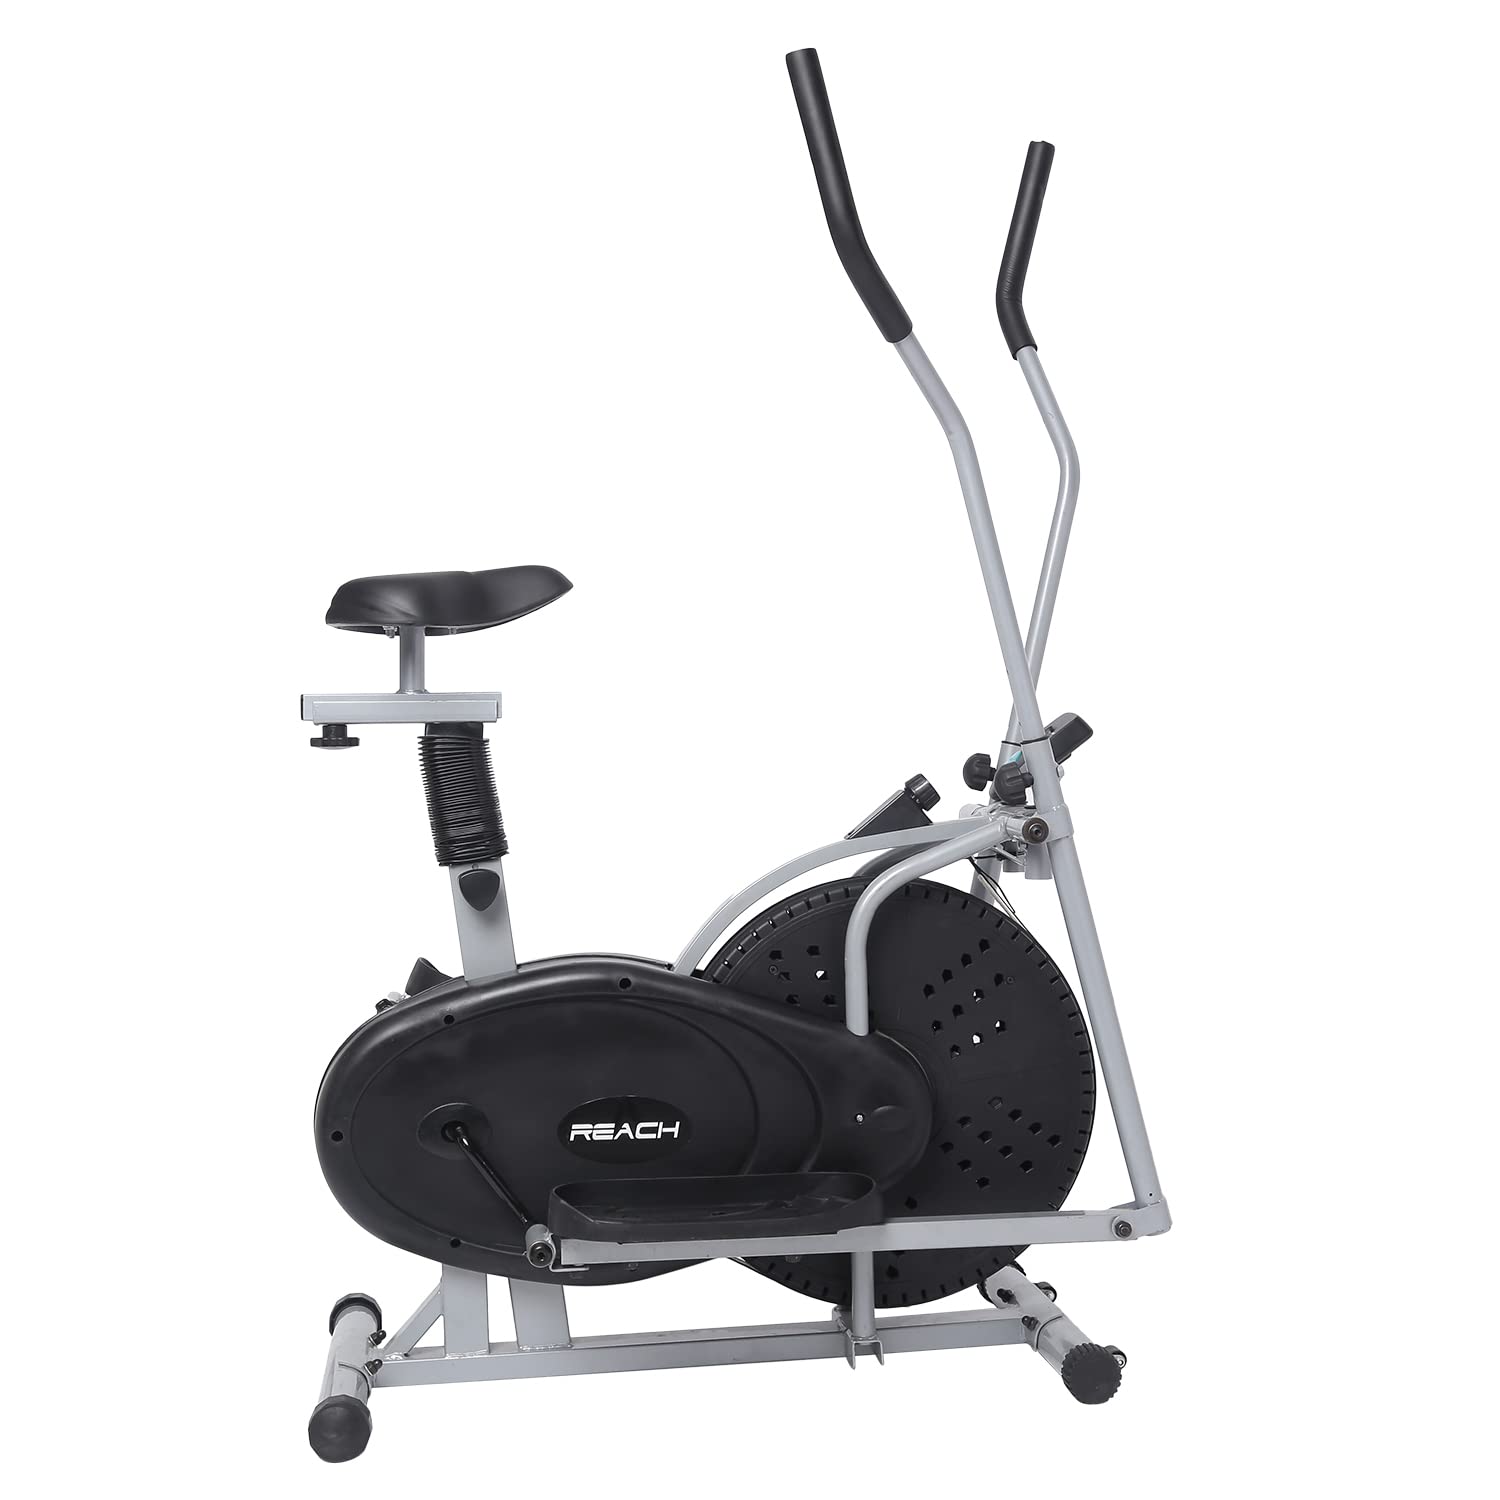 Reach Orbitrek/Orbitrack Exercise Cycle and Cross Trainer | Dual Trainer 2 in 1 Home Fitness Gym Equipment | Scientifically Designed for Complete Body Workout with Minimum Pressure on Knees.